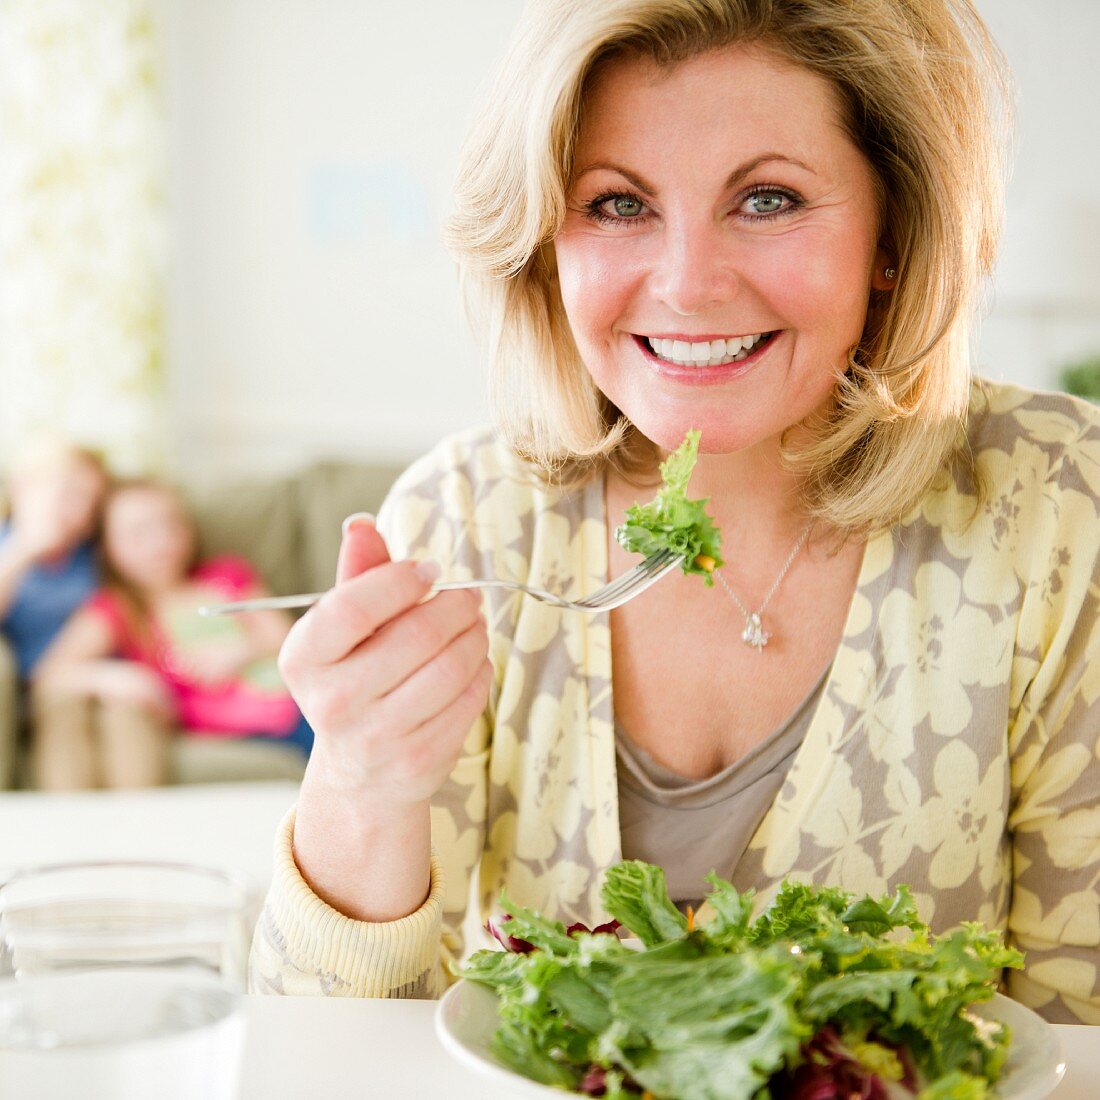 A blonde woman eating salad